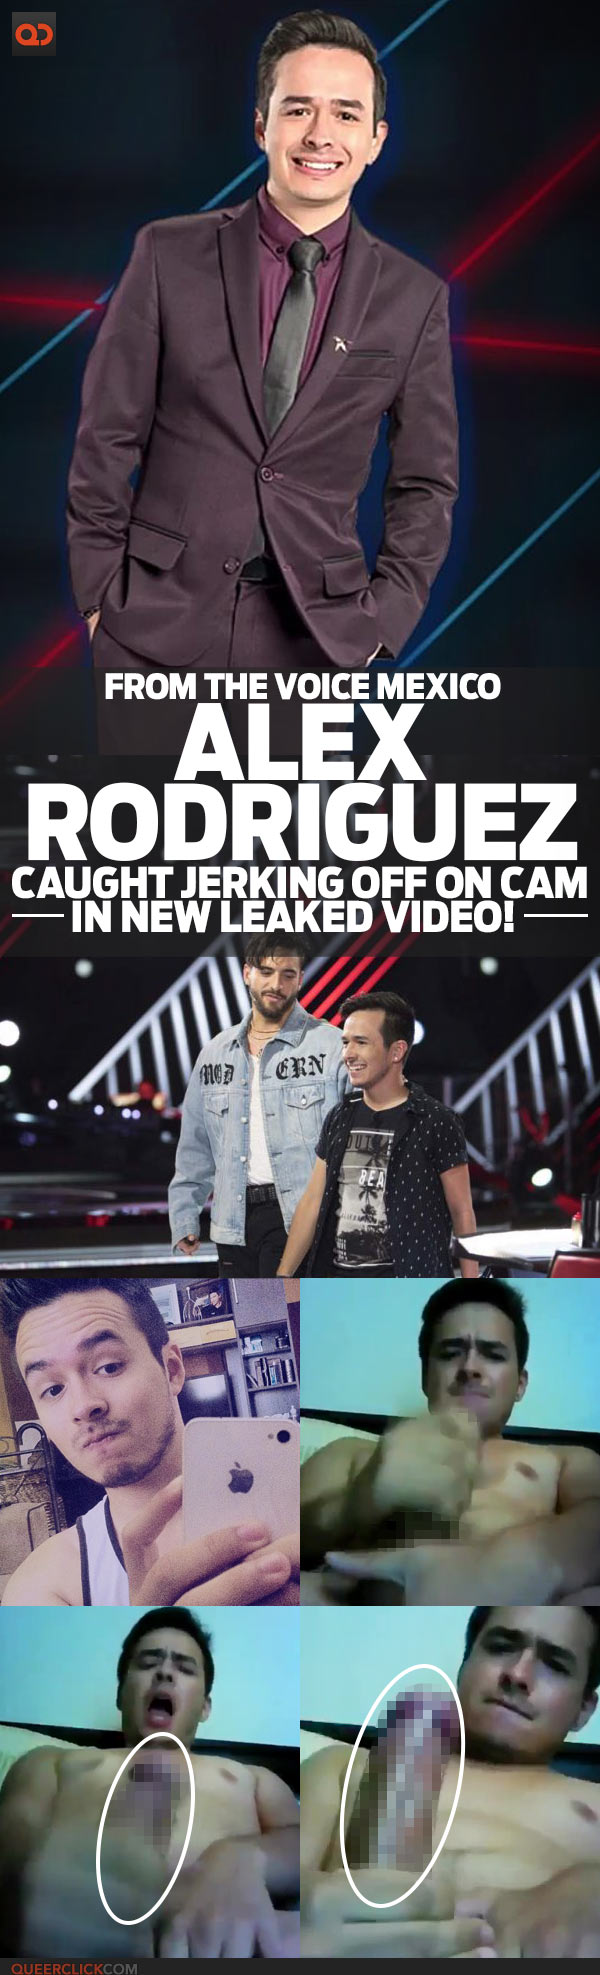 Alex Rodríguez, From The Voice Mexico, Caught Jerking Off On Cam In New Leaked Video!